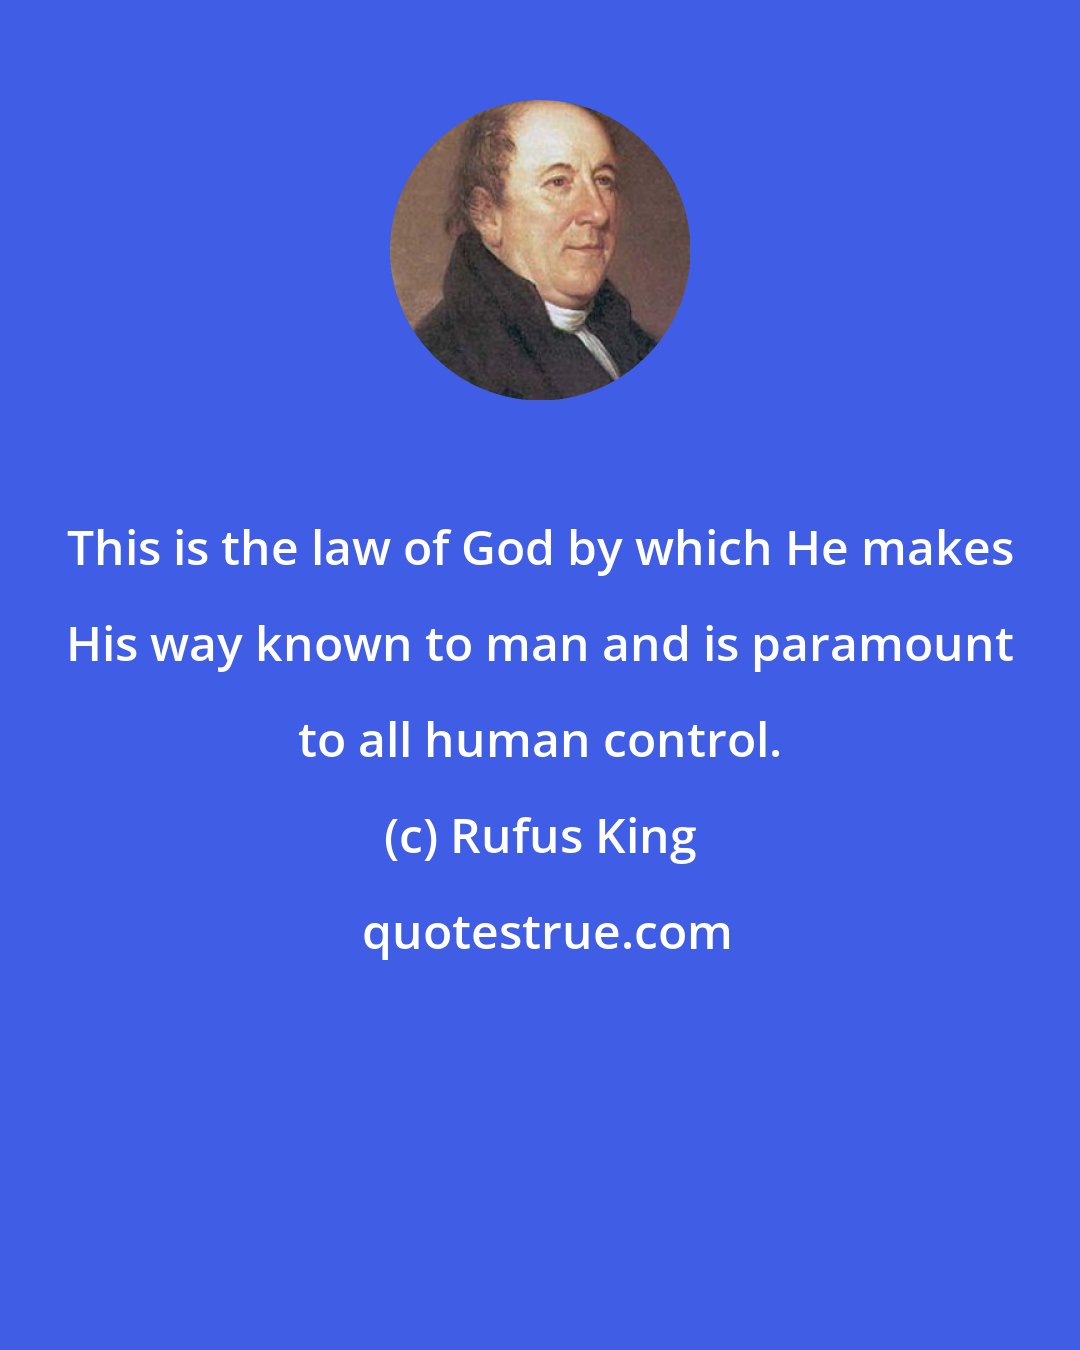 Rufus King: This is the law of God by which He makes His way known to man and is paramount to all human control.